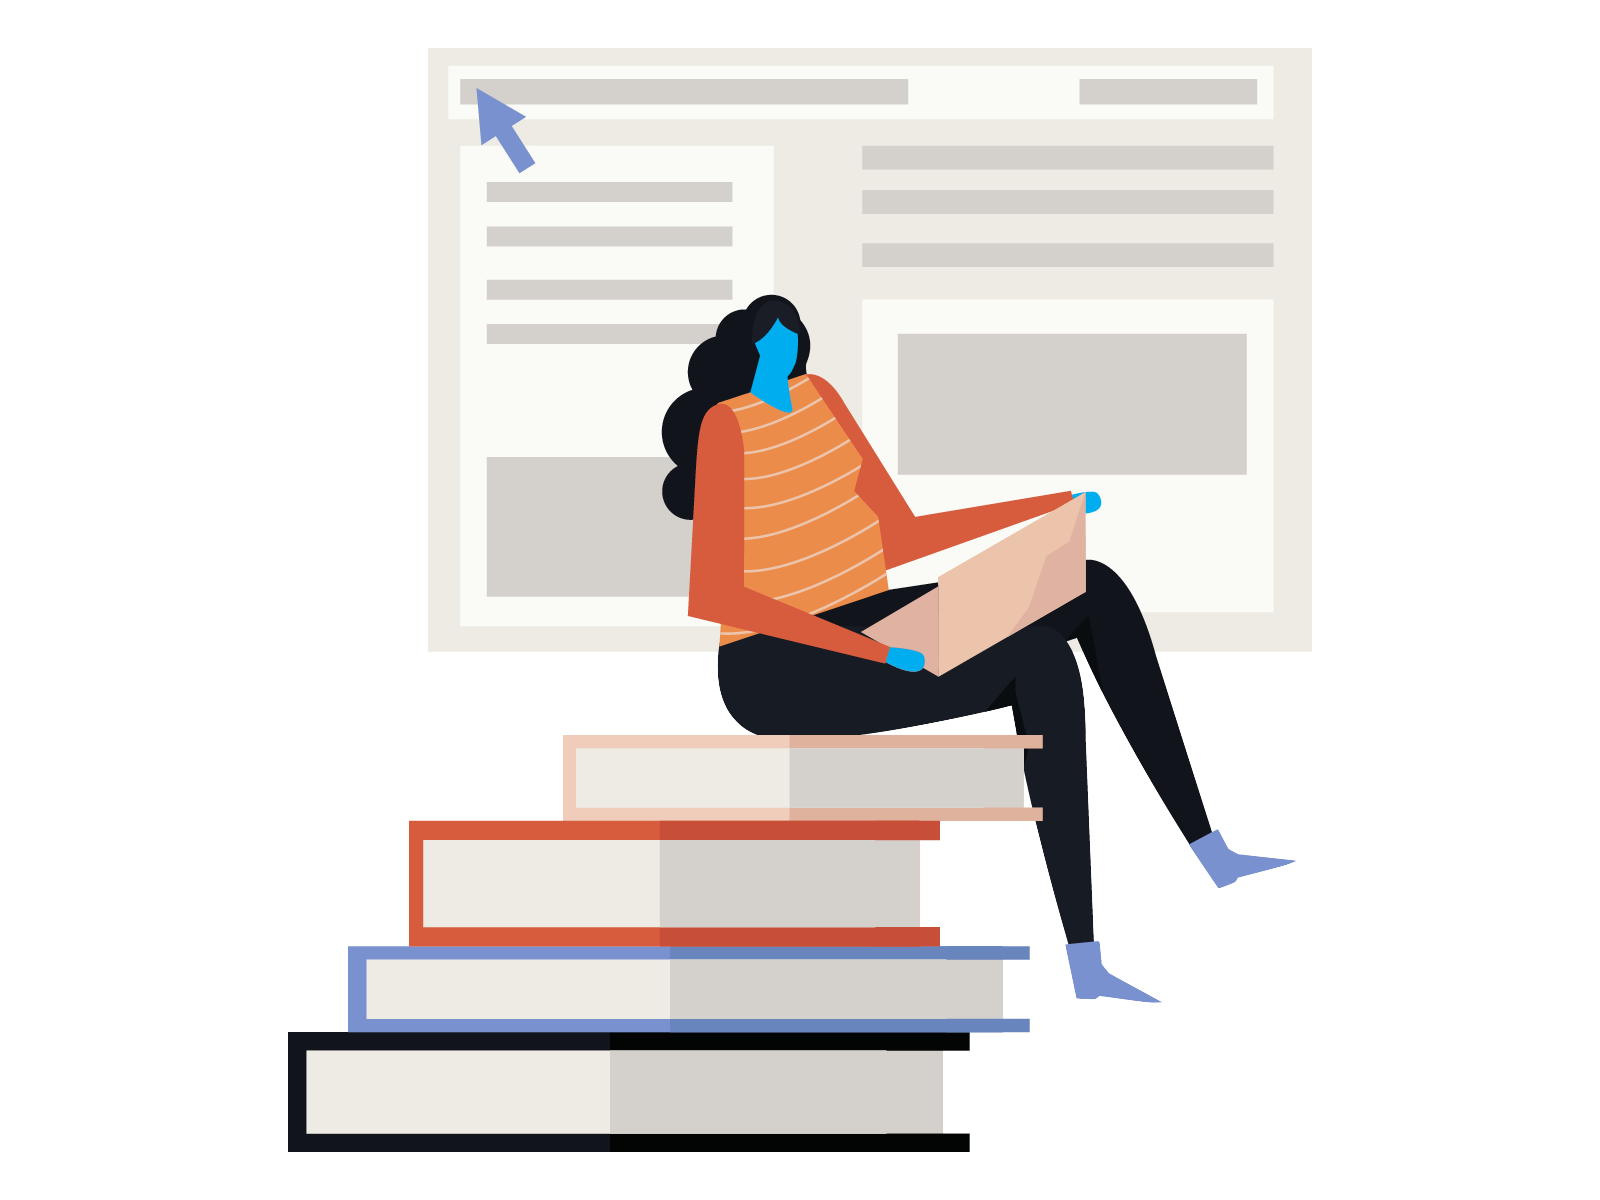 Illustration of a person working on their laptop while seated on a pile of books, representing online research